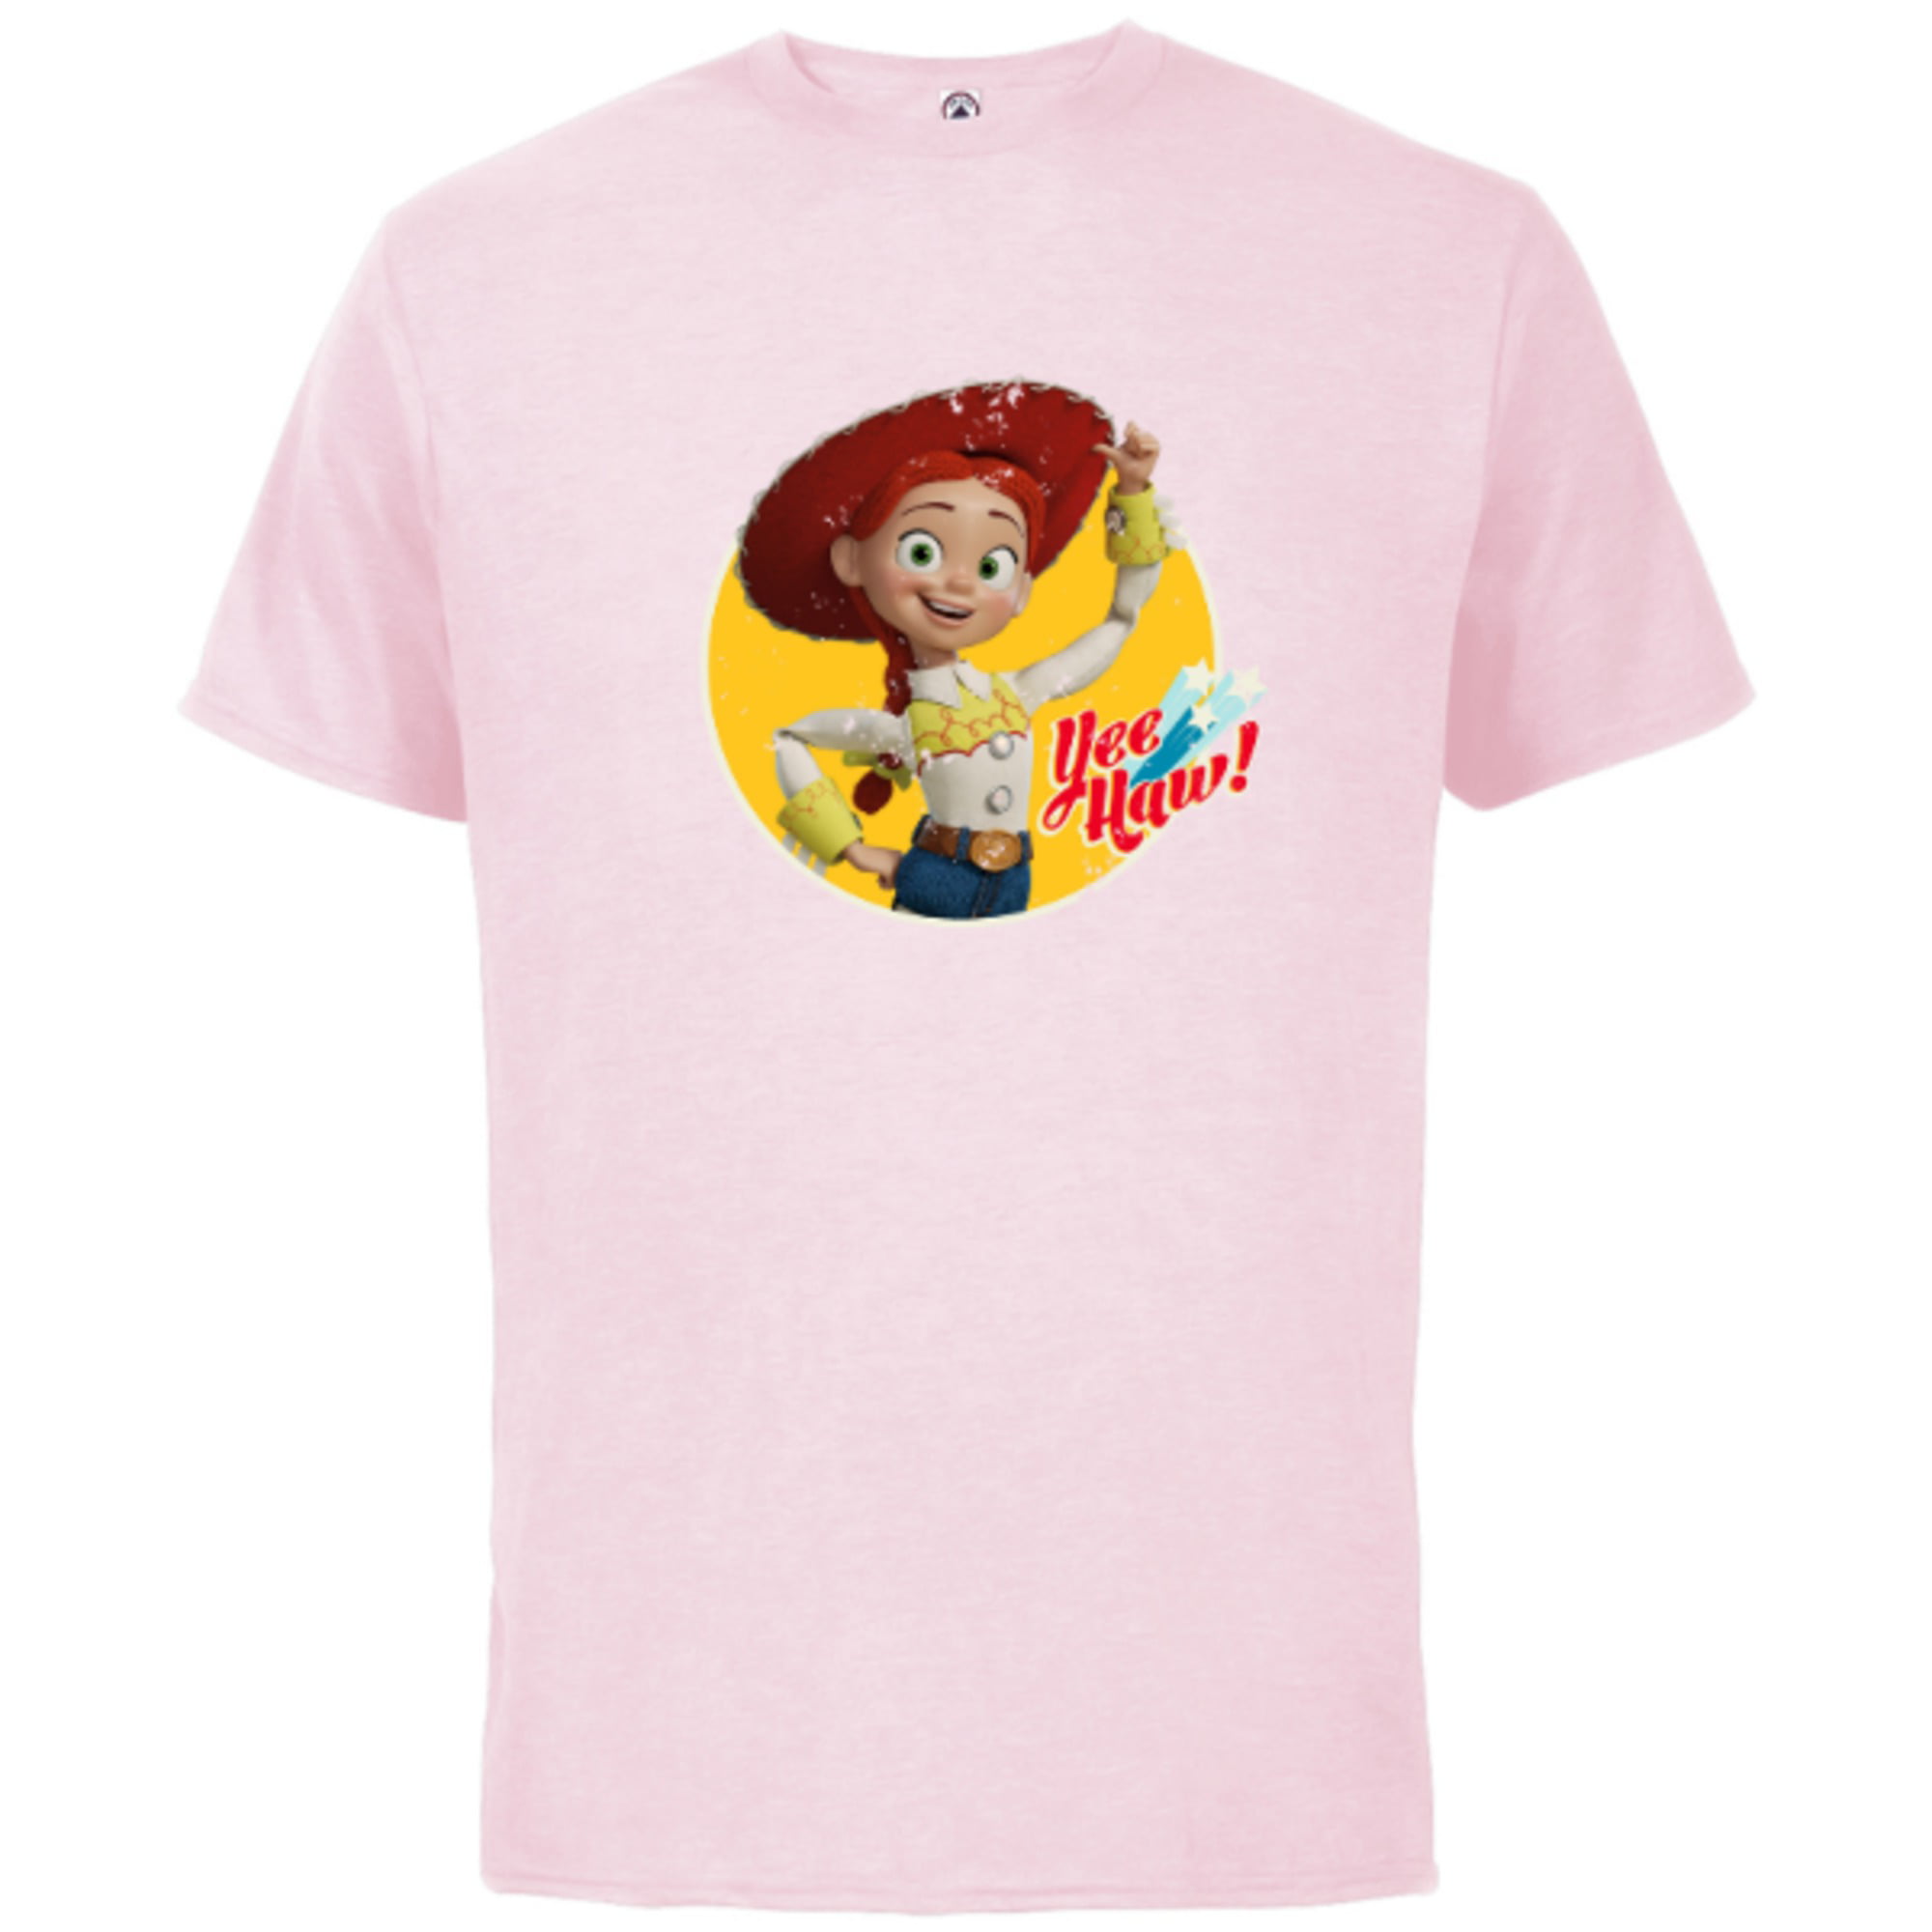 Disney Pixar Toy Story 4 Cowgirl Jessie Yee Haw T-Shirt - Short Sleeve  Cotton T-Shirt for Adults - Customized-Soft Pink